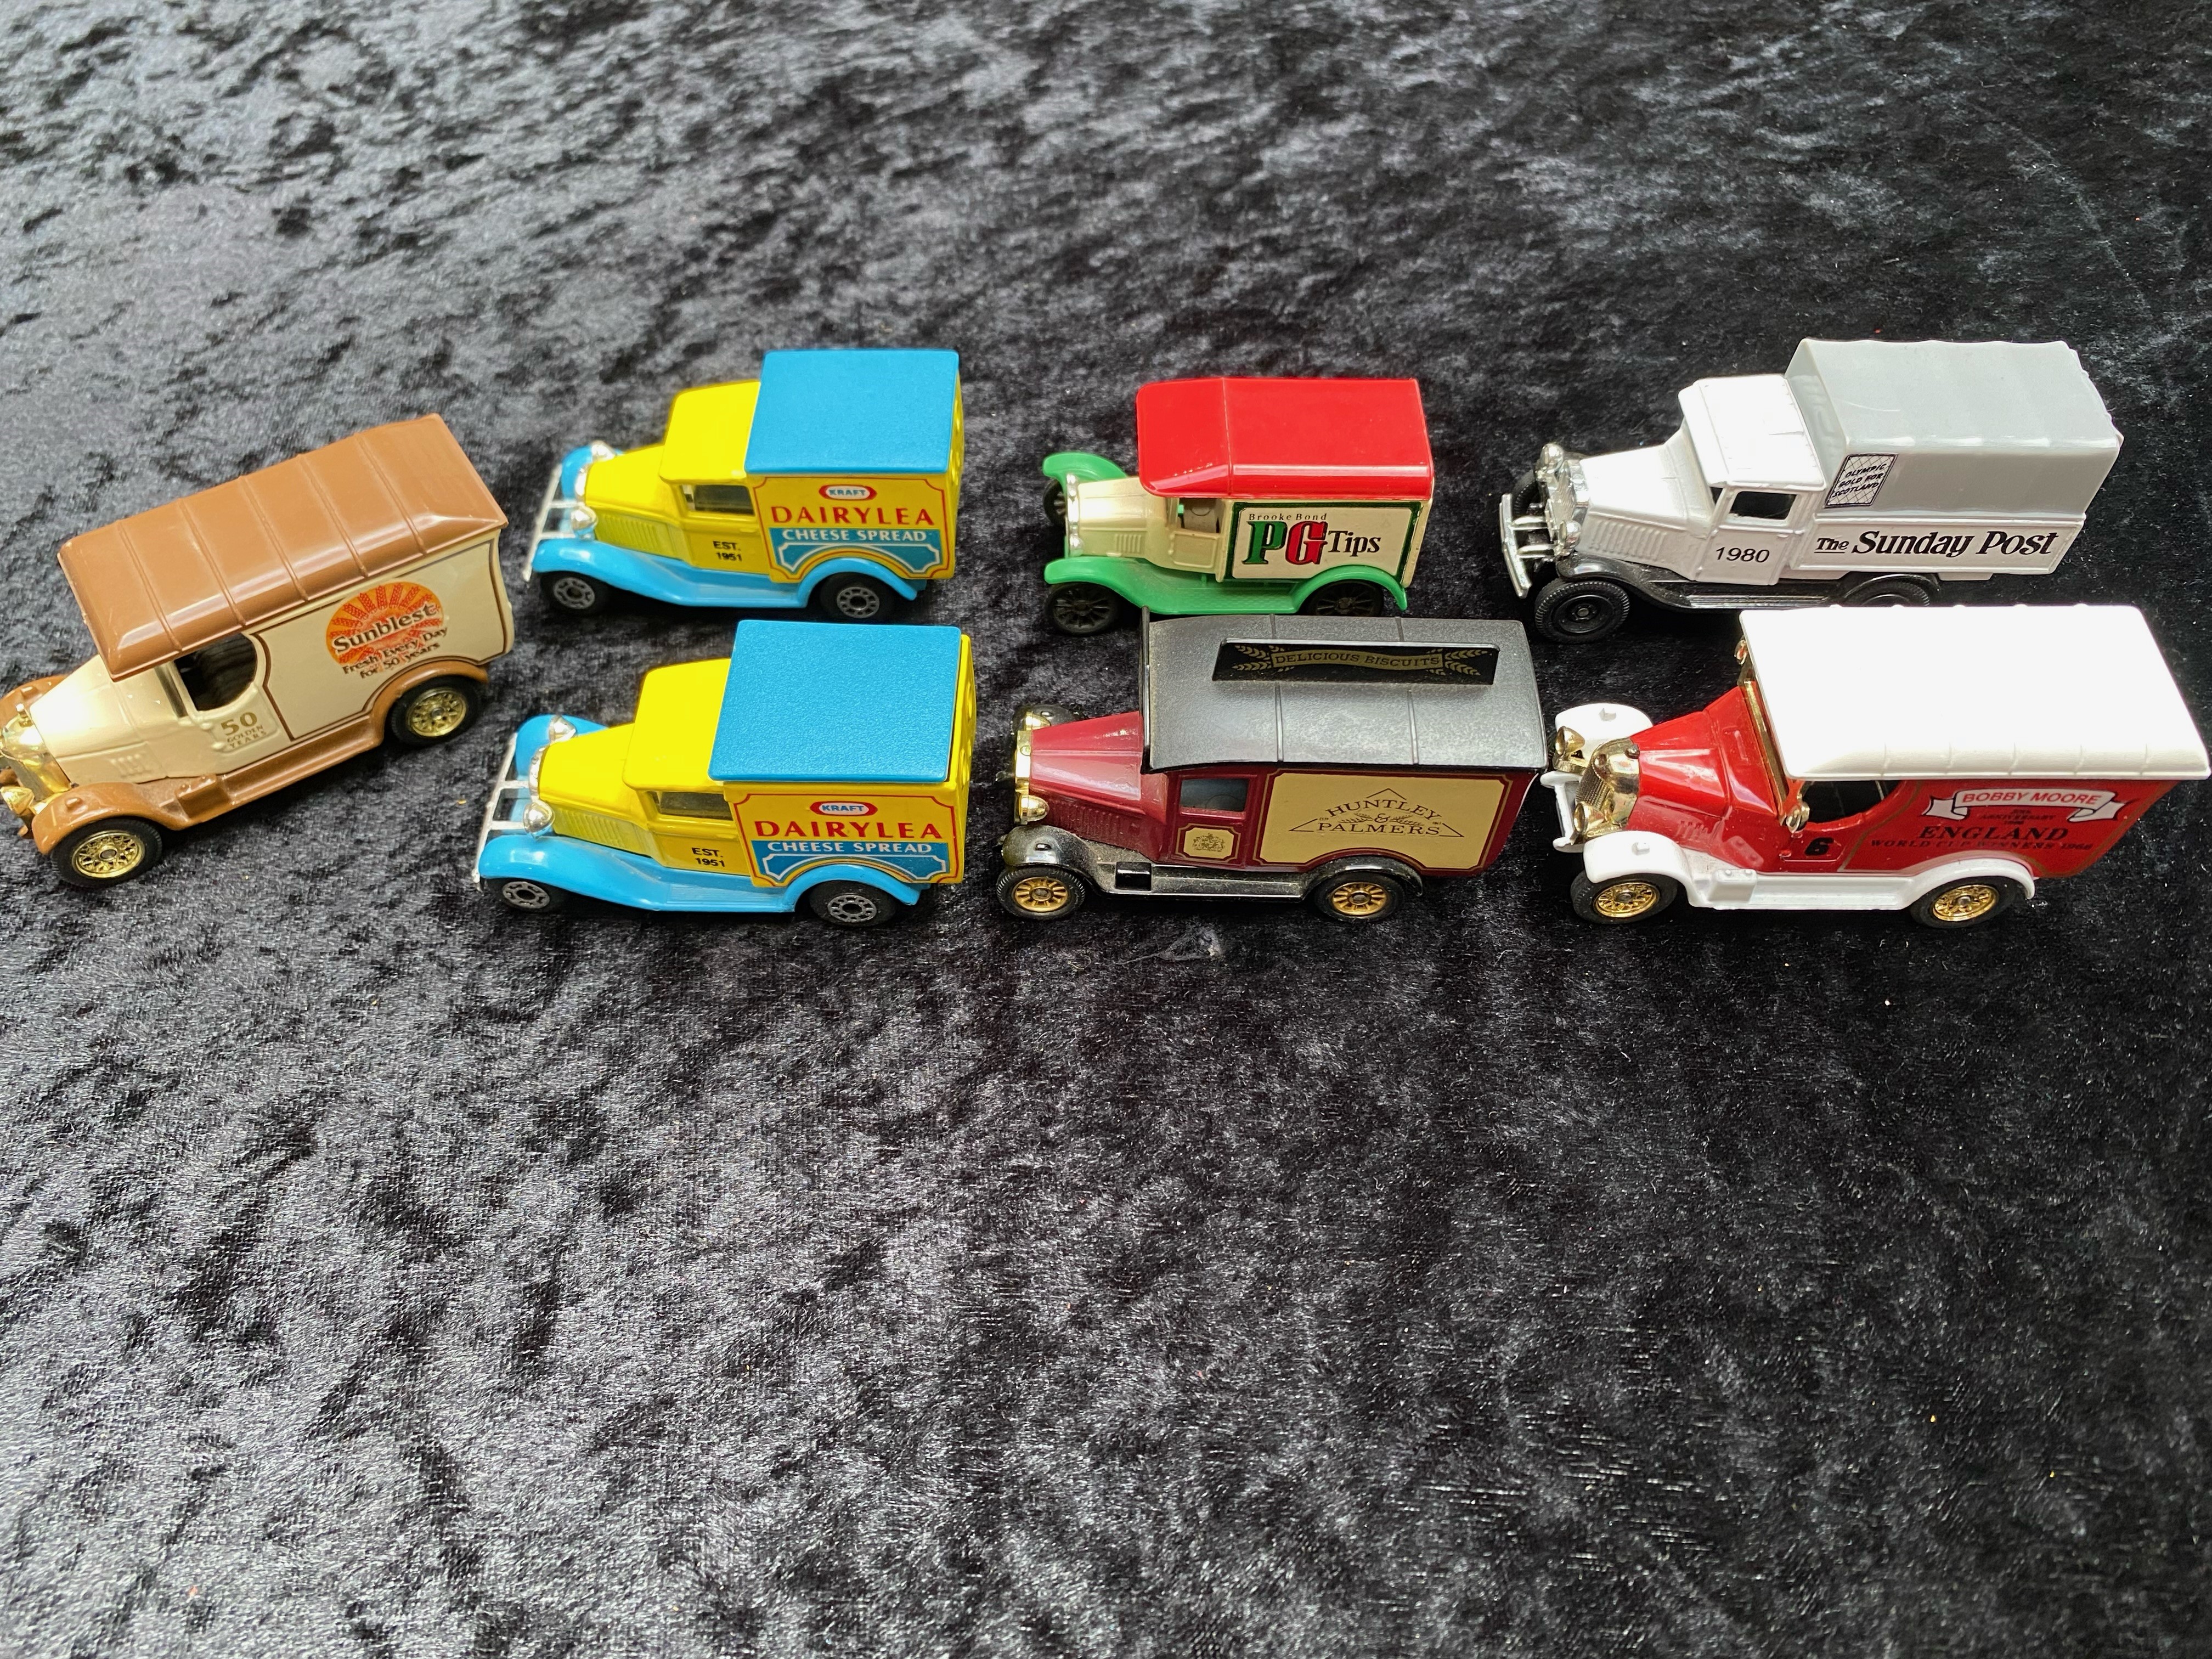 Collection of Die Case Model Vans, comprising PG Tips, Kraft Dairylea, the Sunday Post, Bobby - Image 3 of 3